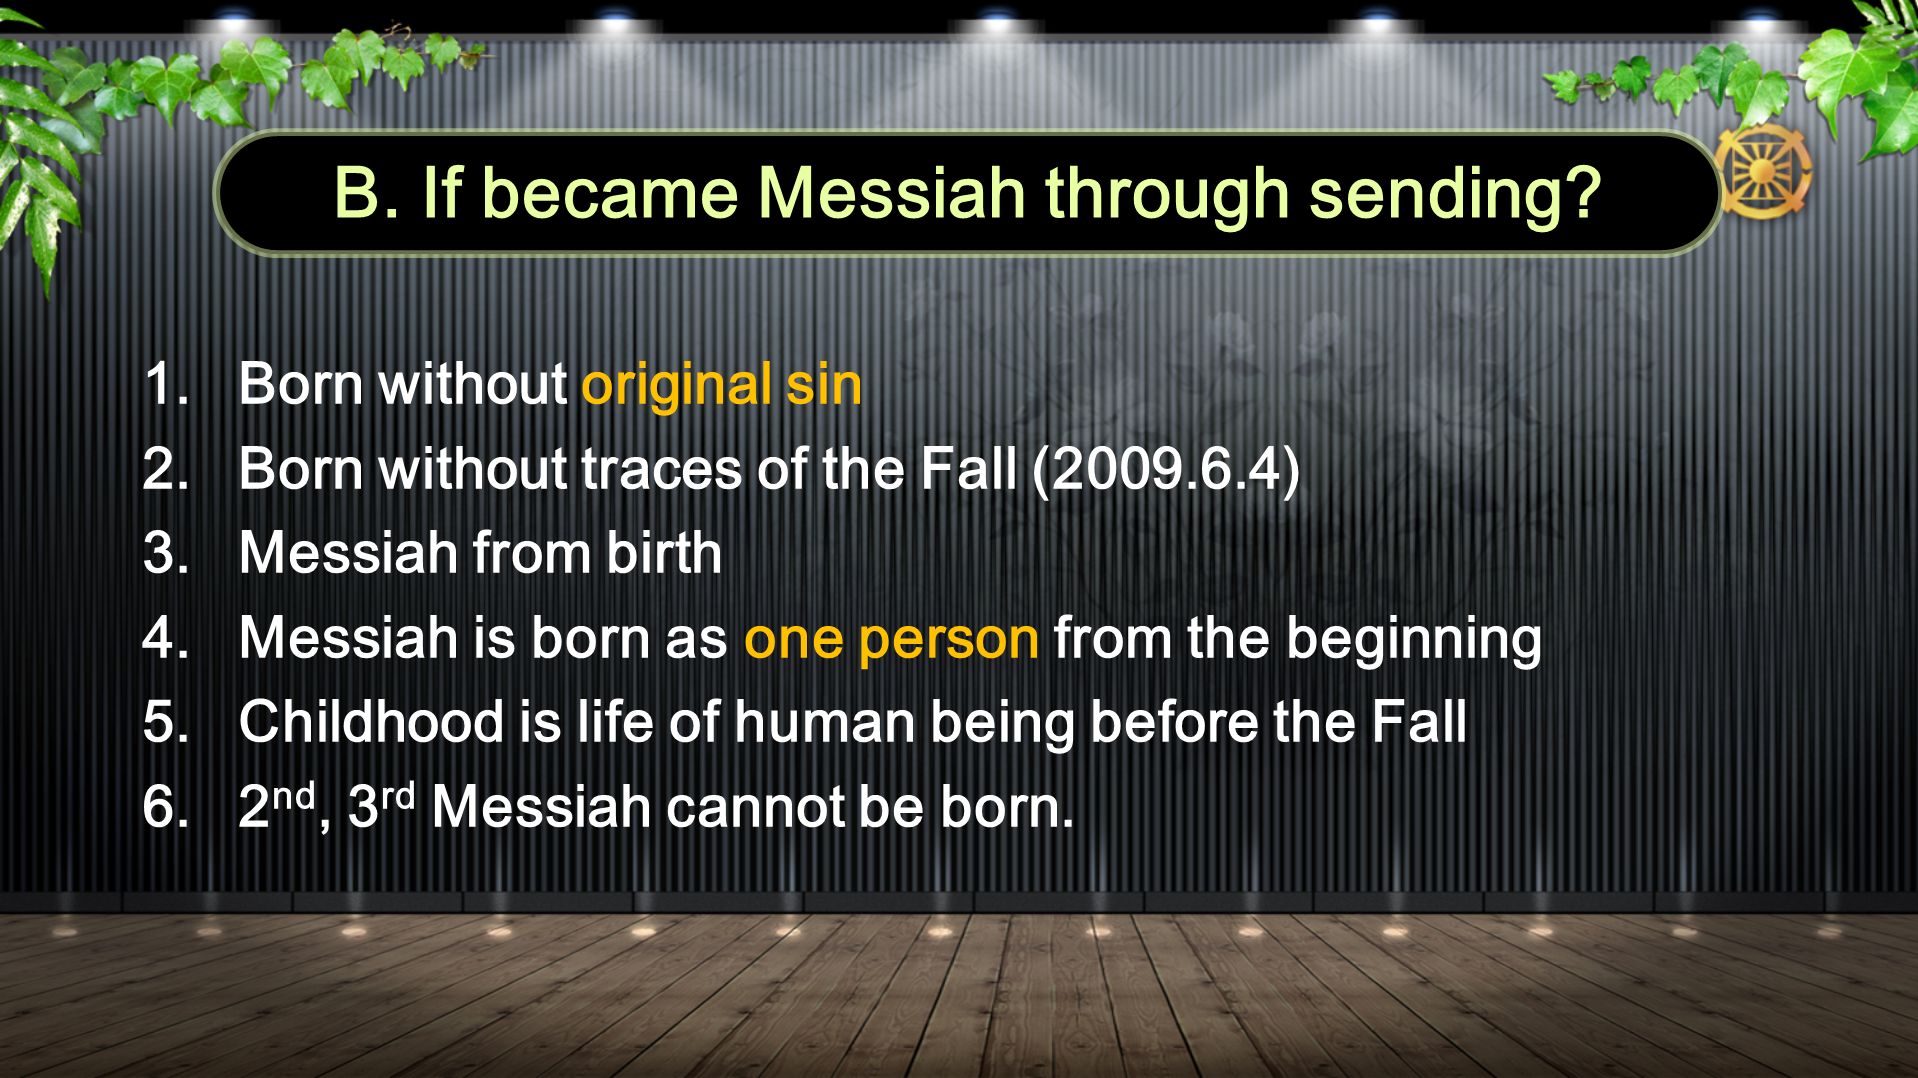 1.Born without original sin 2.Born without traces of the Fall ( ) 3.Messiah from birth 4.Messiah is born as one person from the beginning 5.Childhood is life of human being before the Fall 6.2 nd, 3 rd Messiah cannot be born.